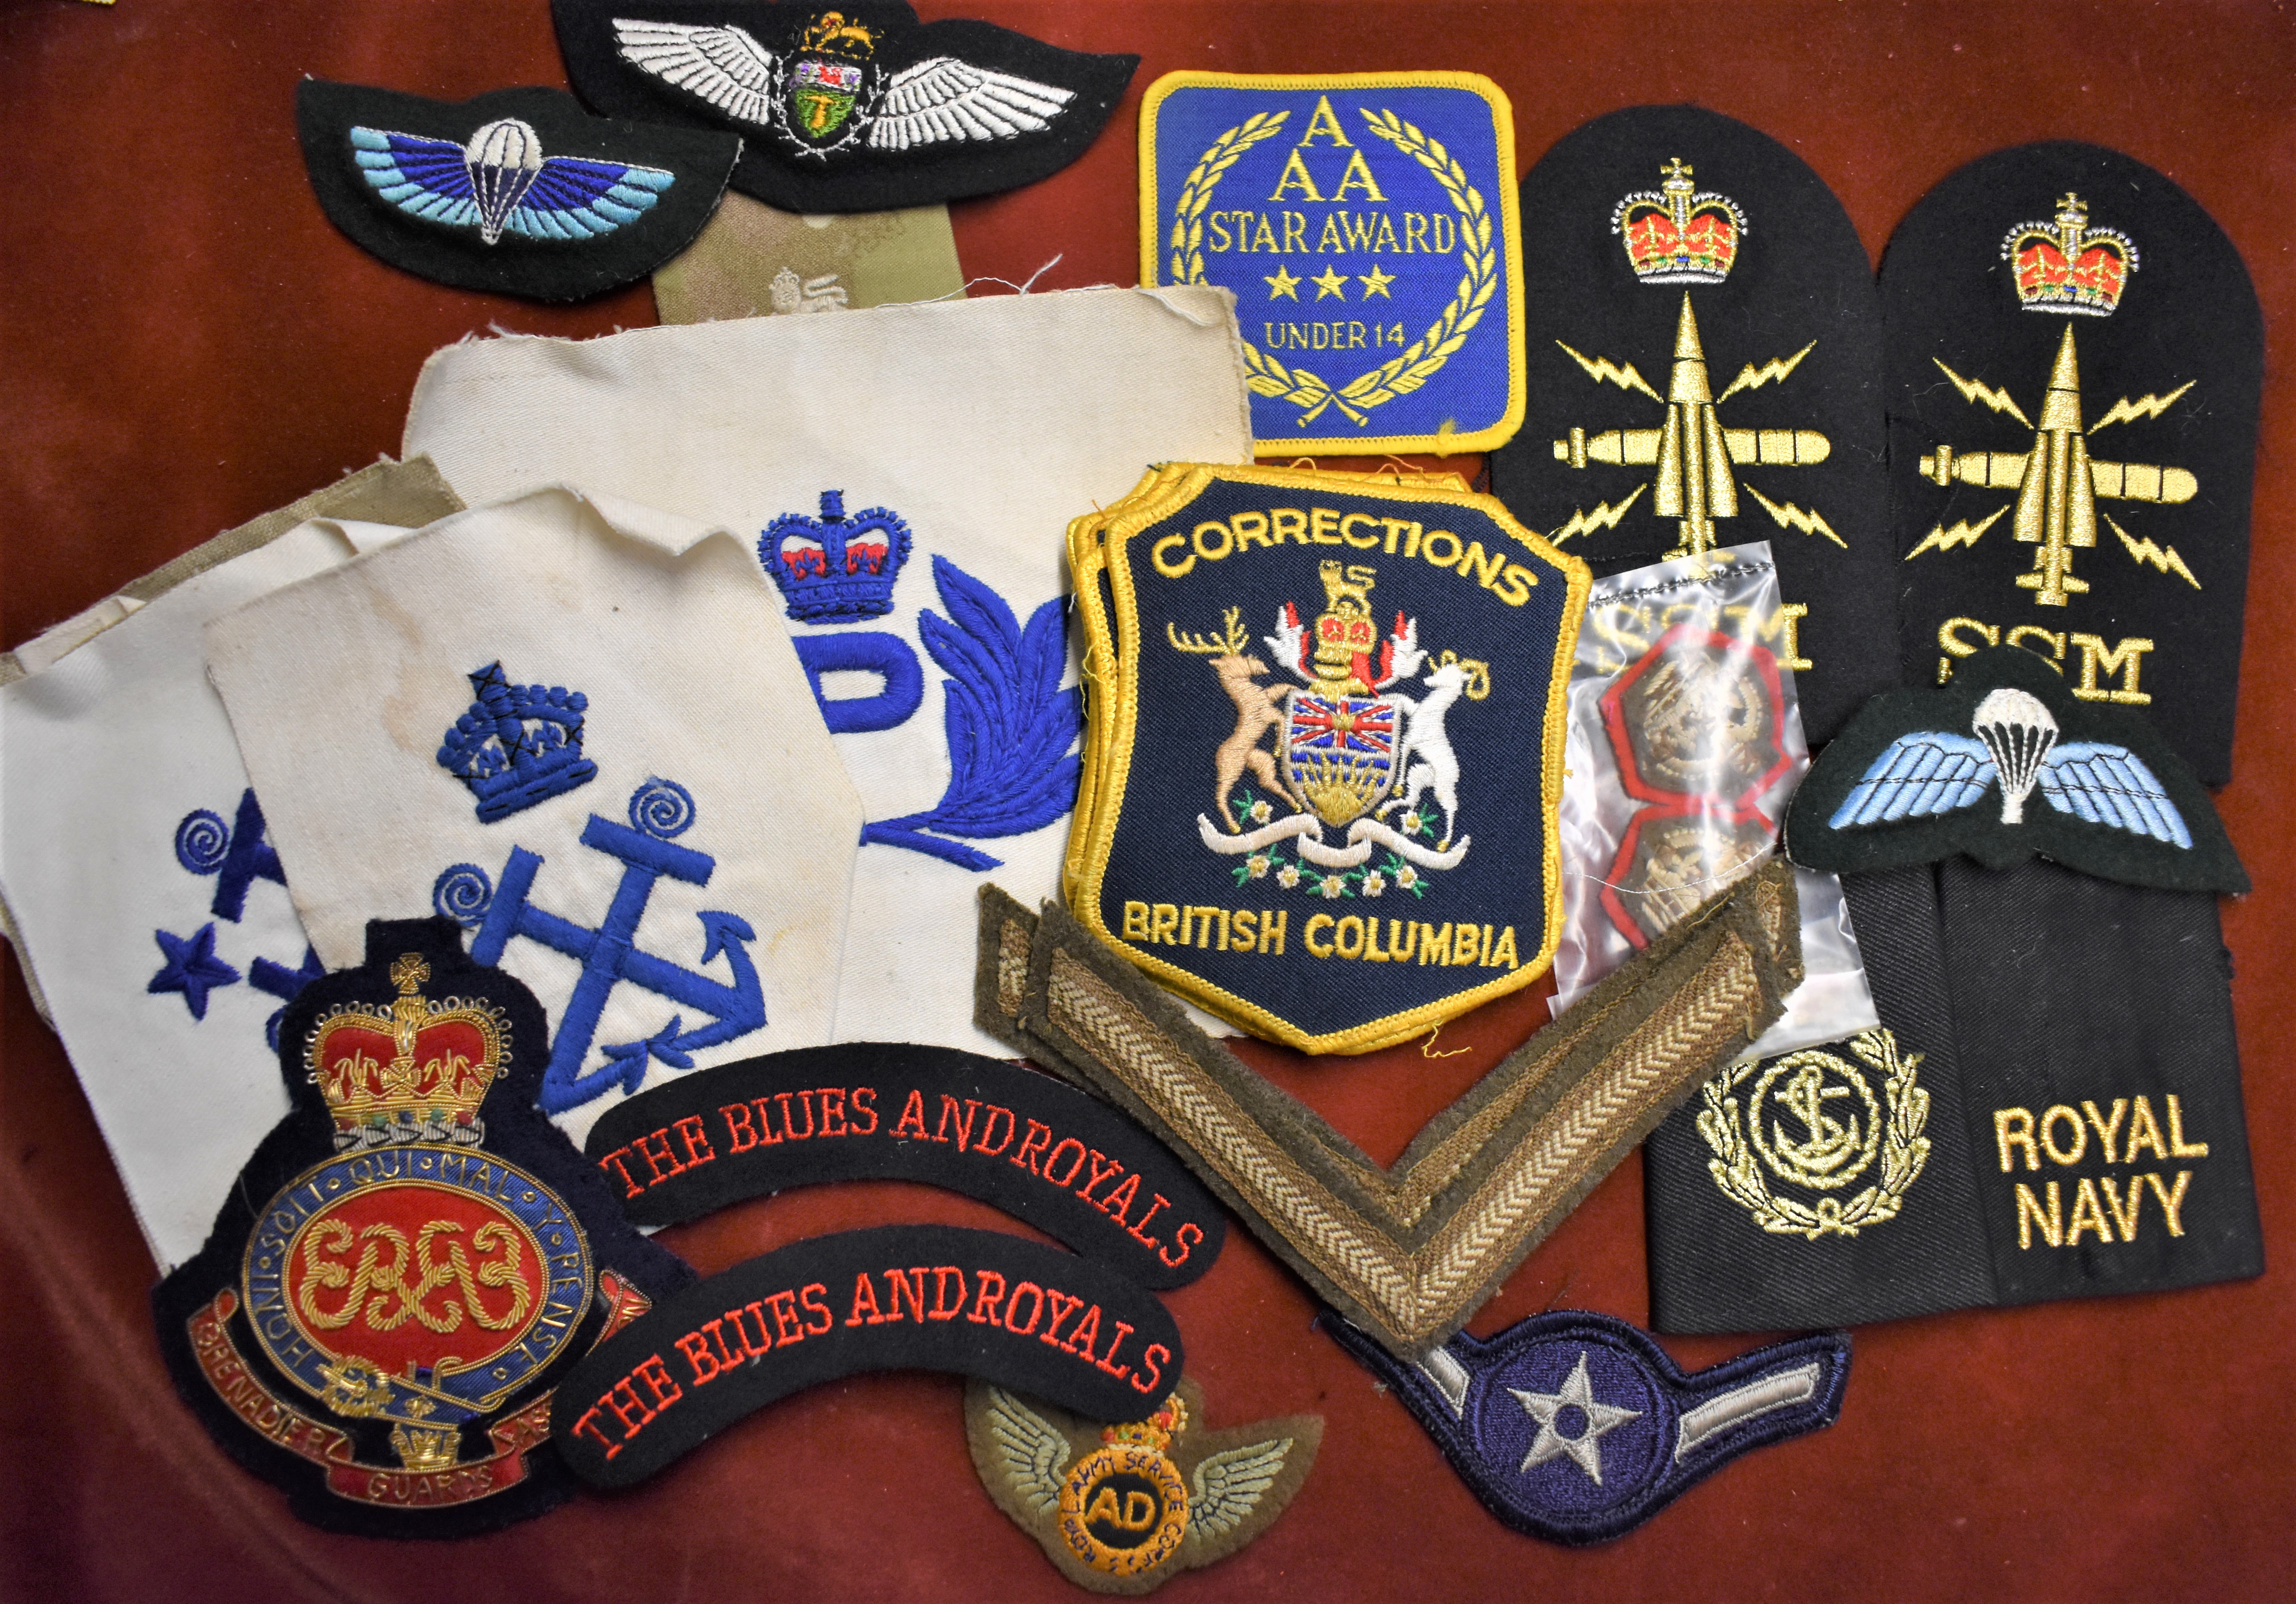 British and Commonwealth Military Cloth Patches (25) including Royal Navy patches, British